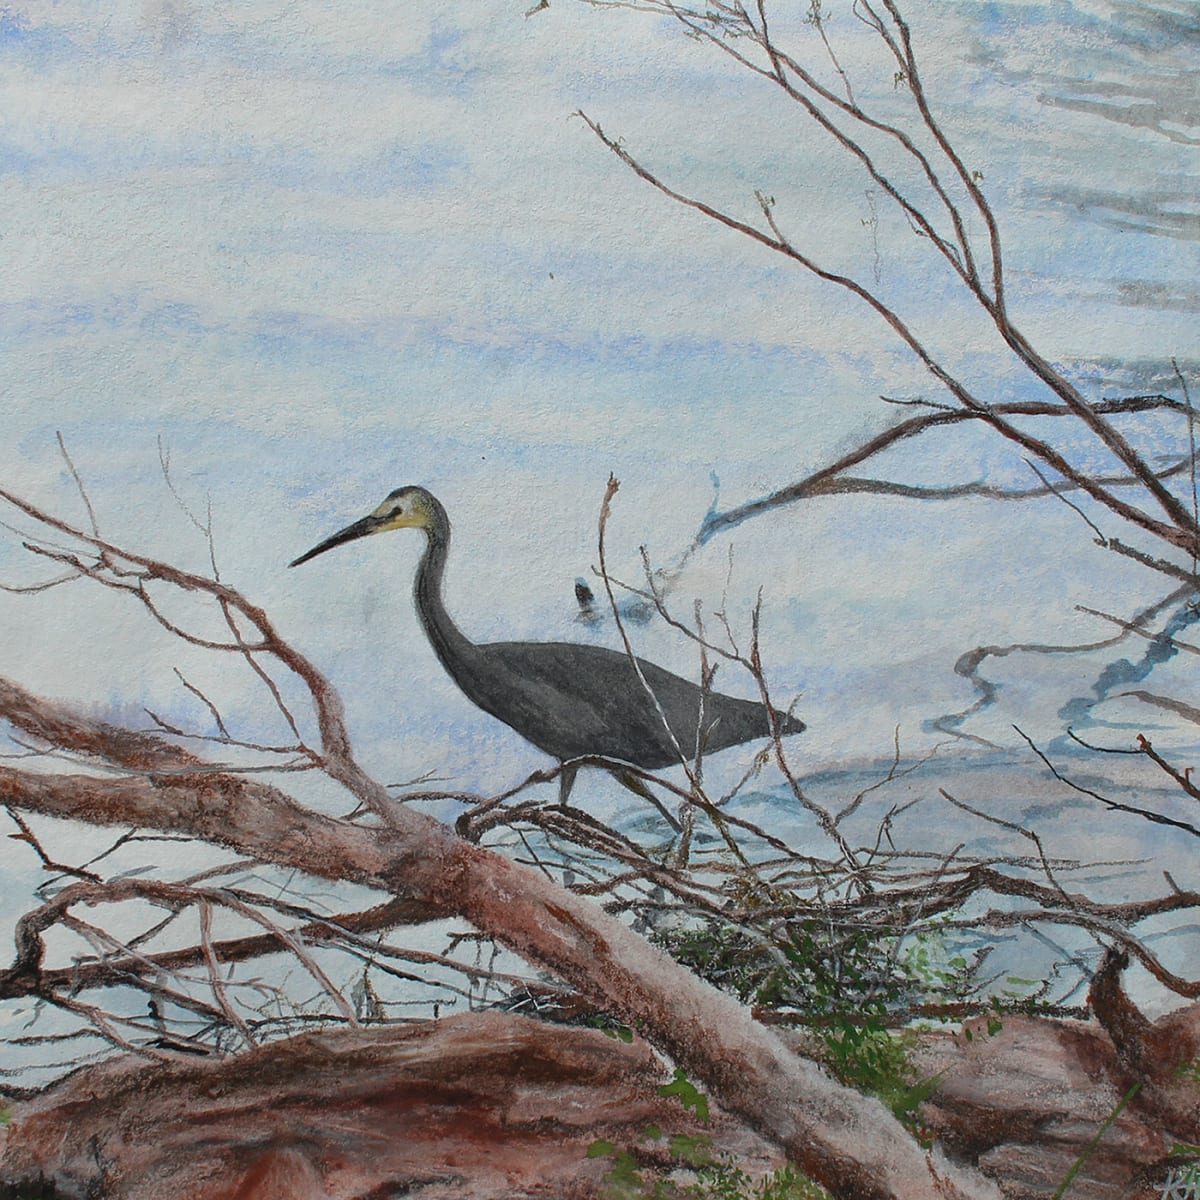 White Faced Heron by the Lakeside I by Kirsten Hocking  Image: "White Faced Heron by the Lakeside I", original painting by Kirsten Hocking, mixed media on cotton paper, 25cm x 25cm (unframed), 2024